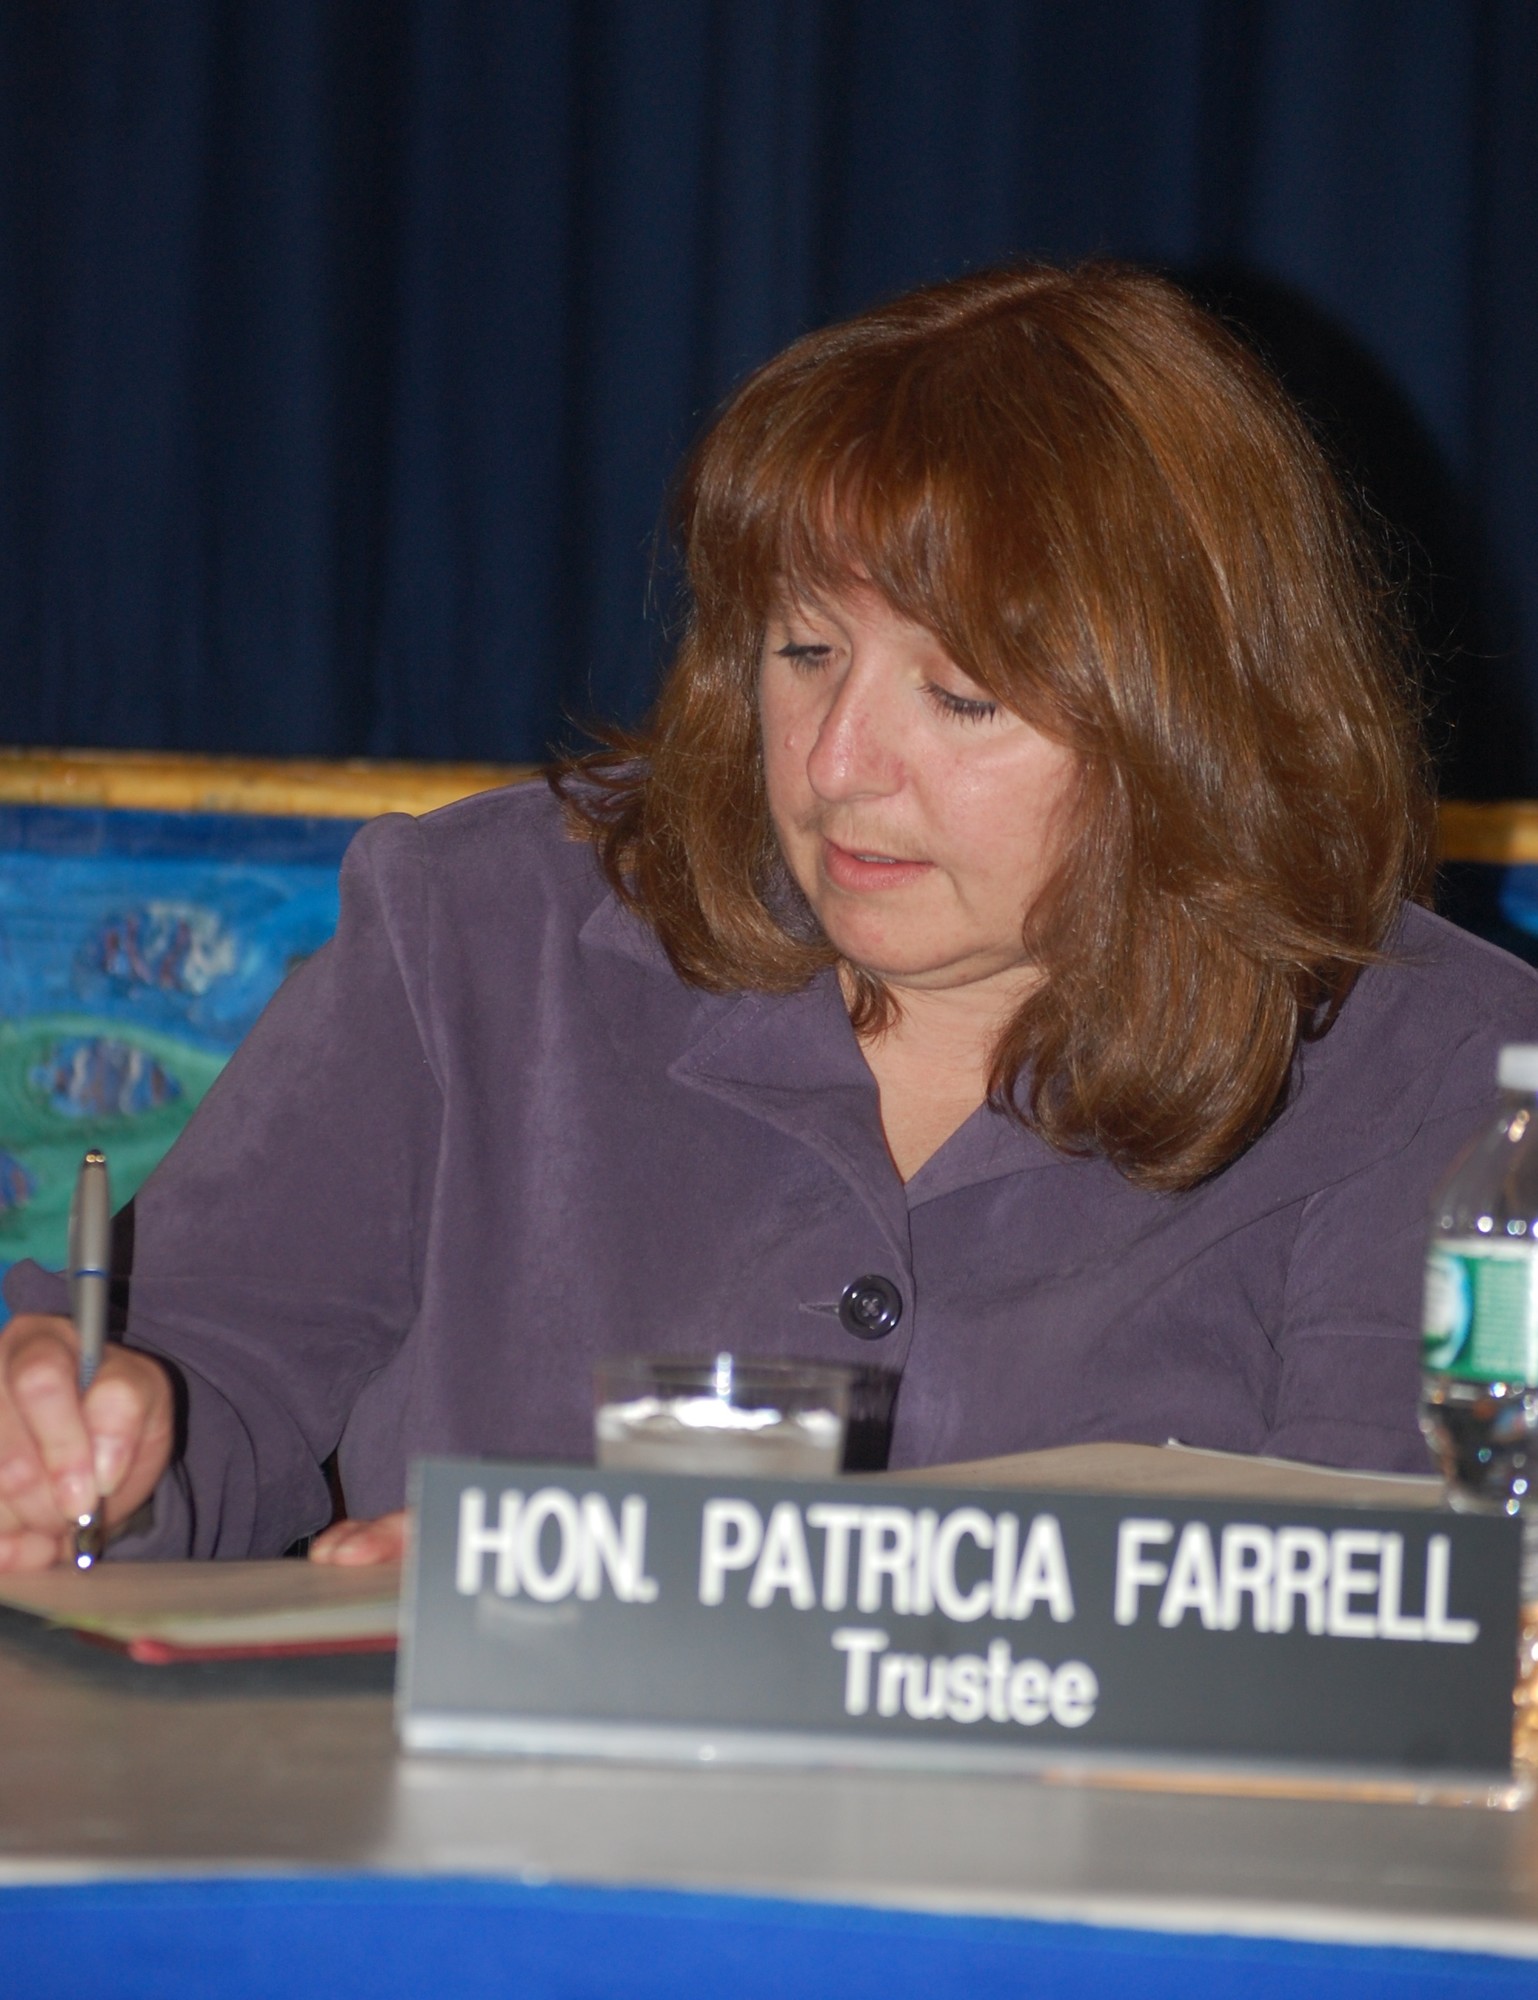 Patricia Farrell was sworn in as the newest member of the District 13 Board of Education.